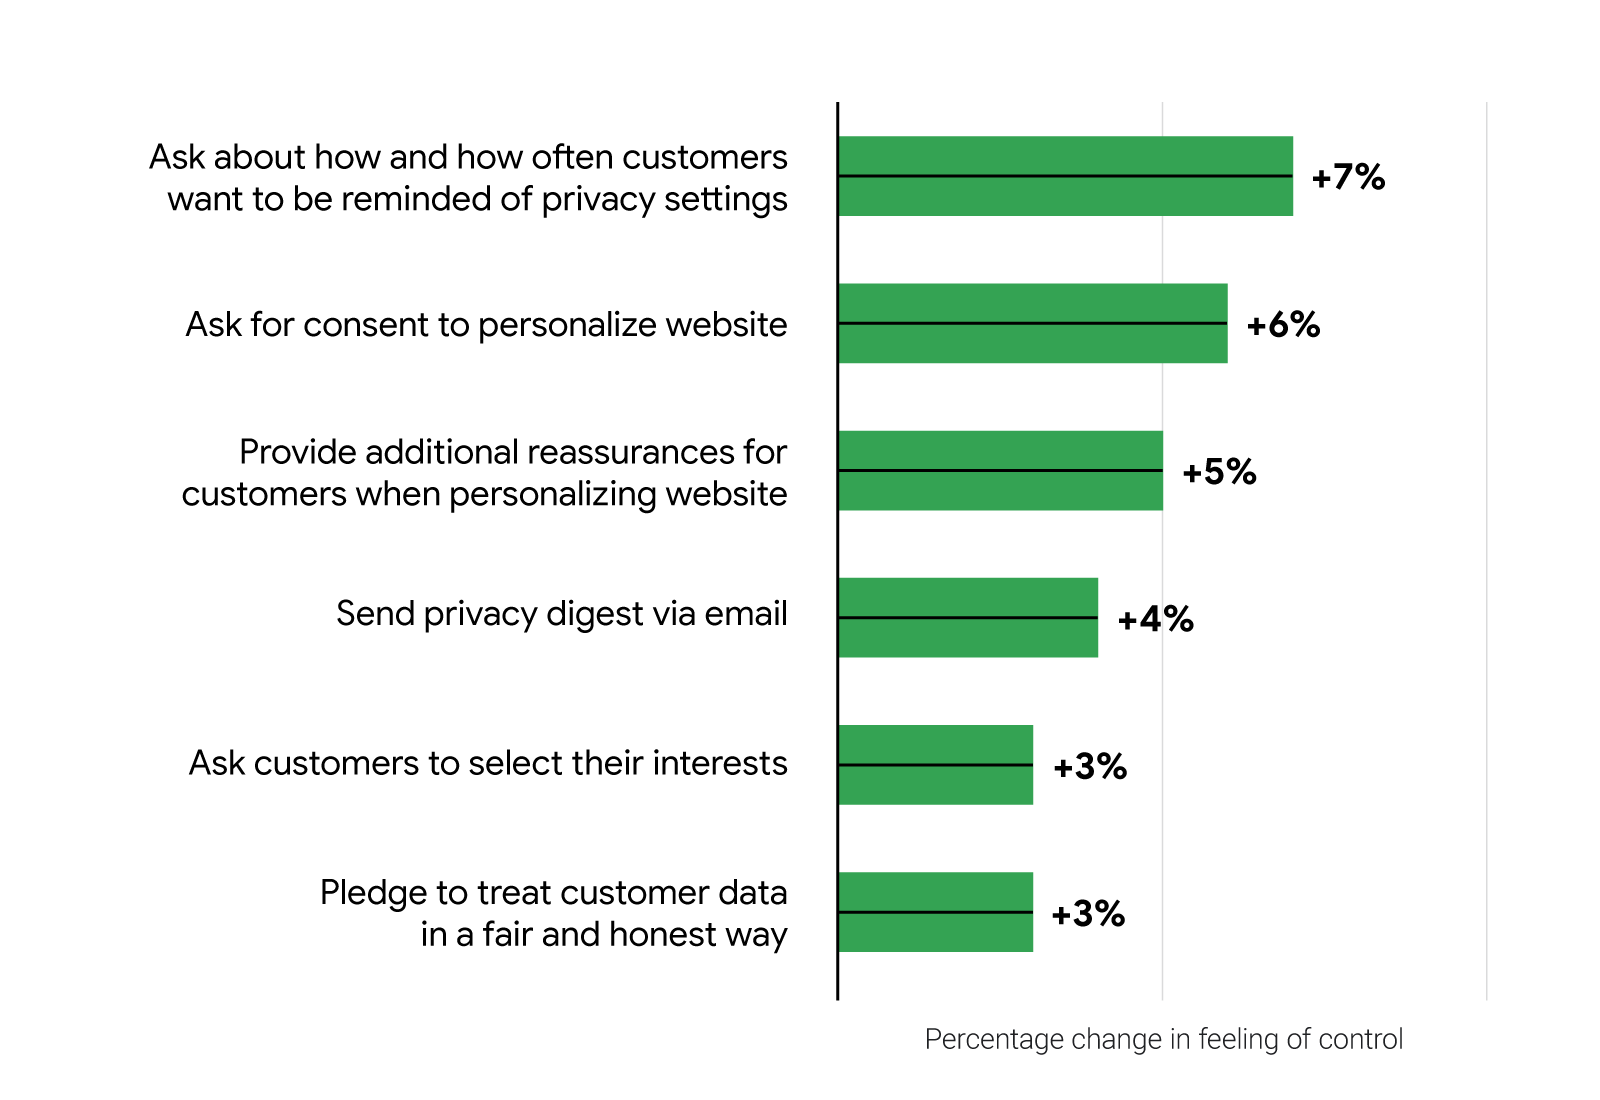 A horizontal bar graph shows how much more in control people feel when privacy pratices are implemented, for example reminders of privacy settings (+7%), gaining consent to personalize website (+6%), and asking to select interests (+3%).